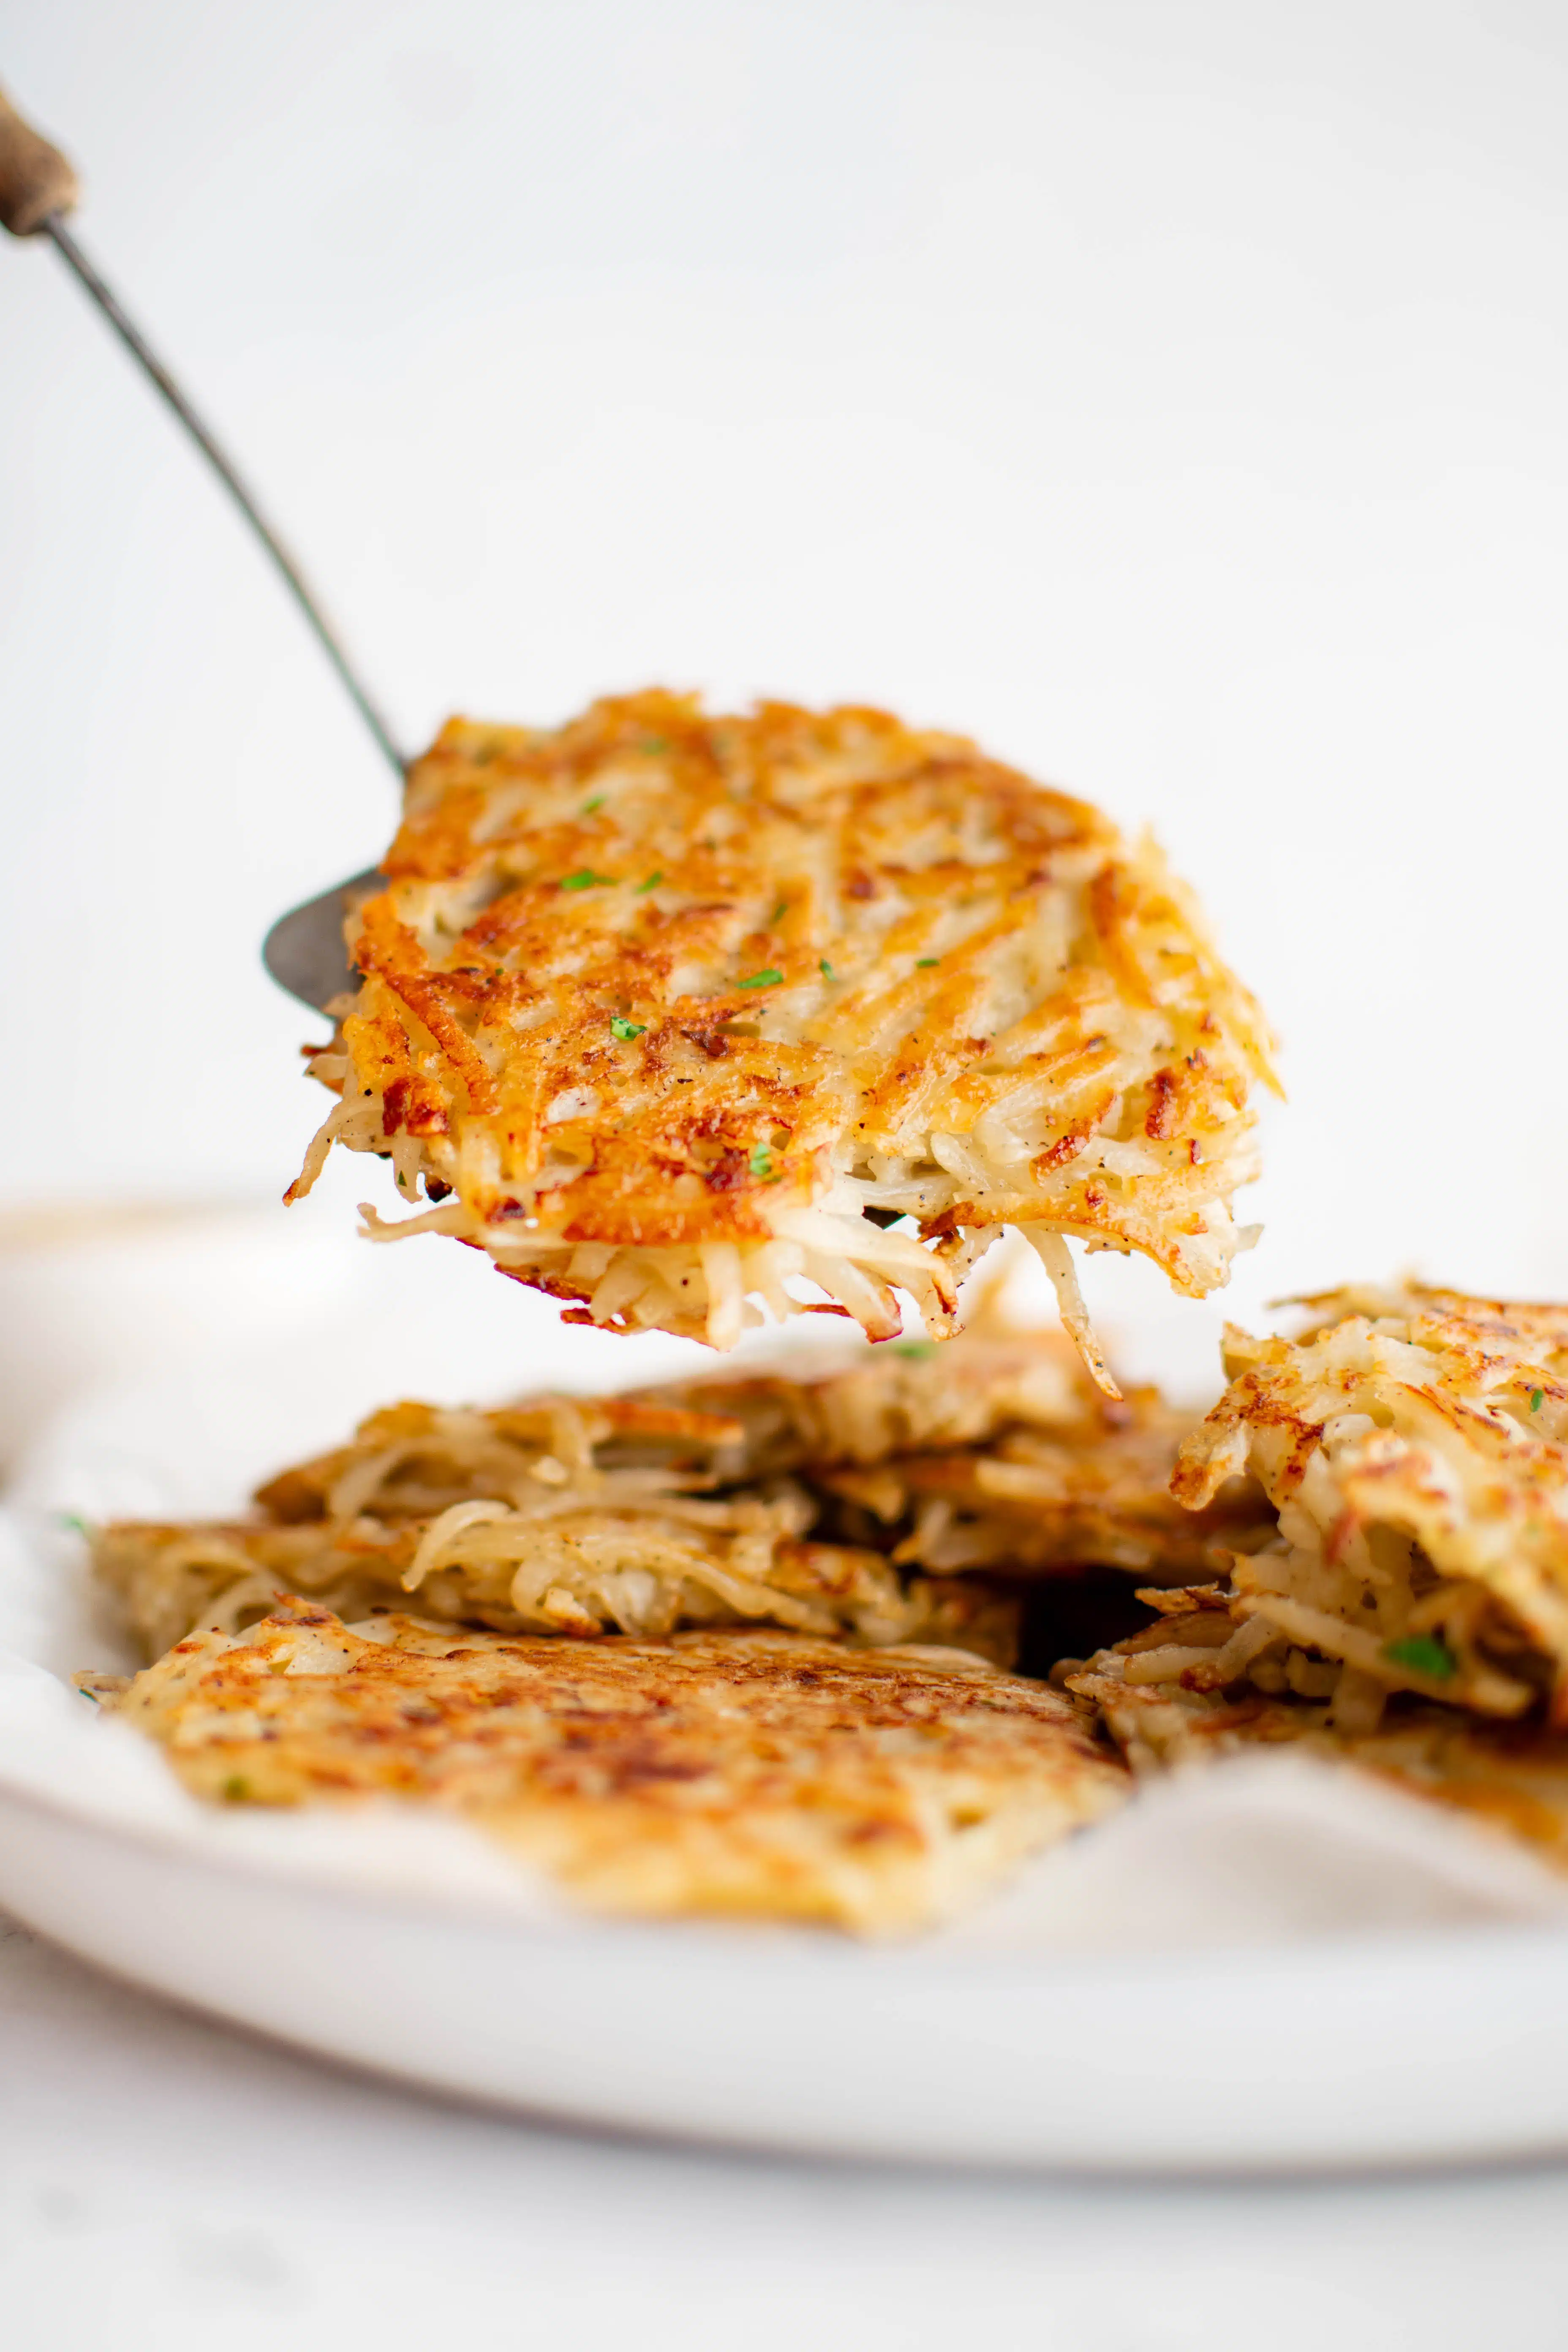 Metal spatula holding a single German potato pancake hovering over a plate filled with more potato pancakes.